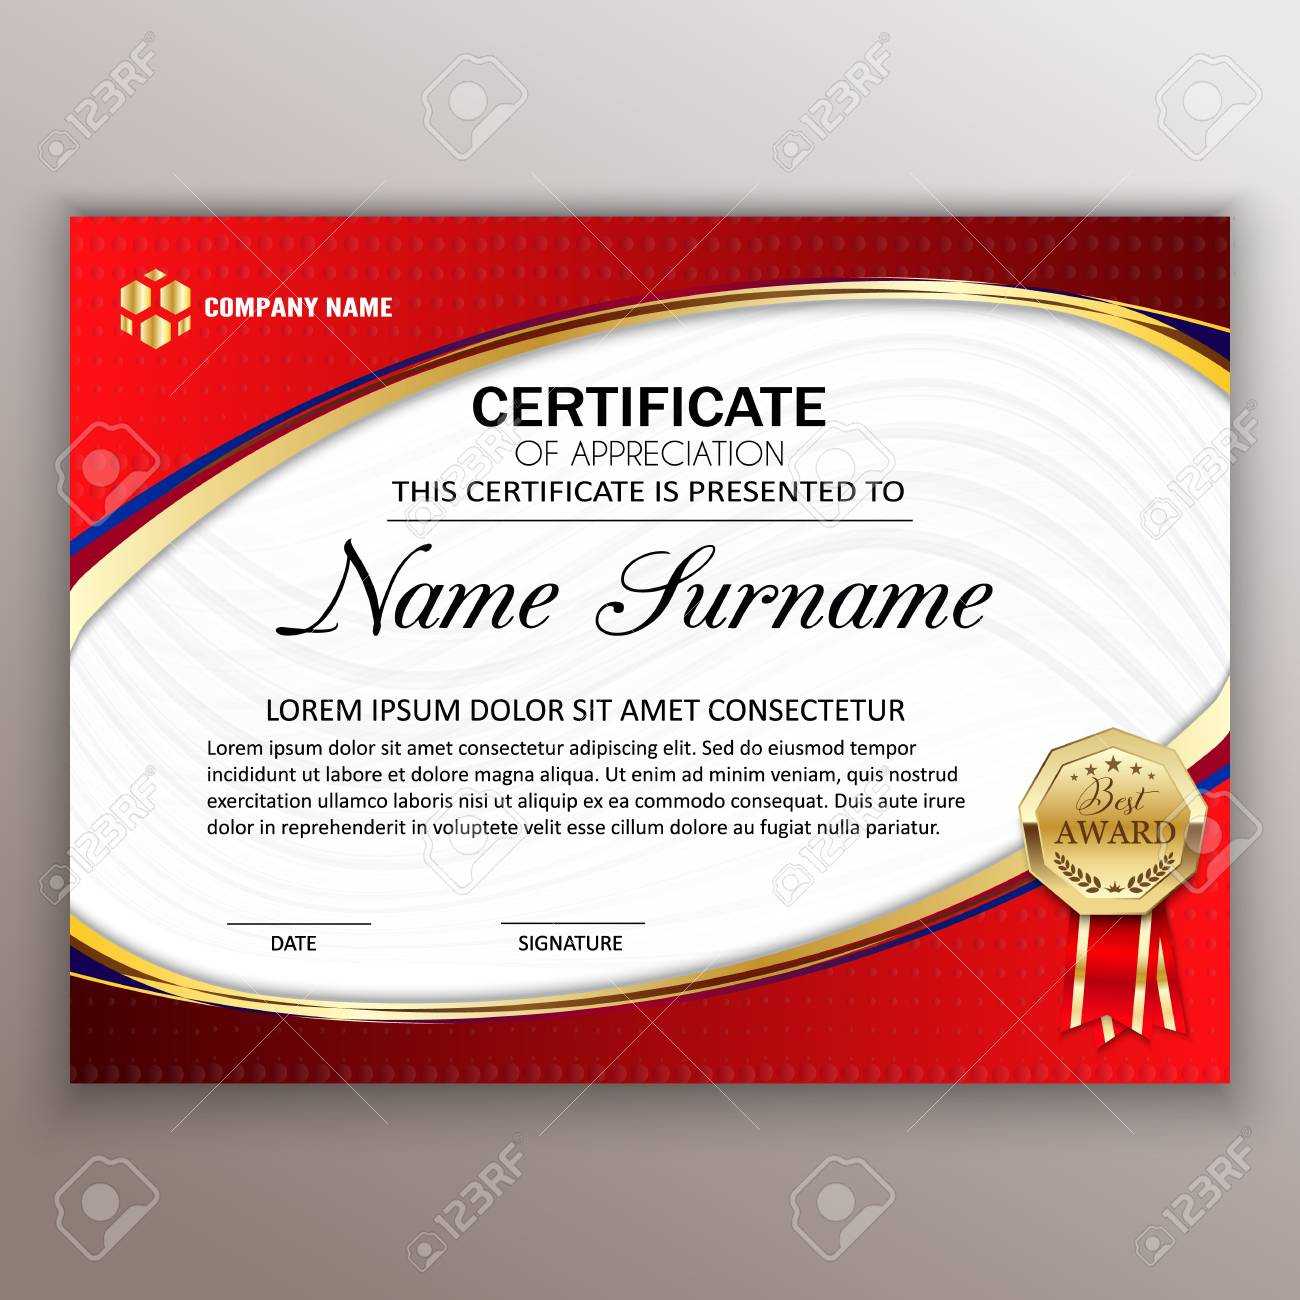 Beautiful Certificate Template Design With Best Award Symbol Intended For Beautiful Certificate Templates